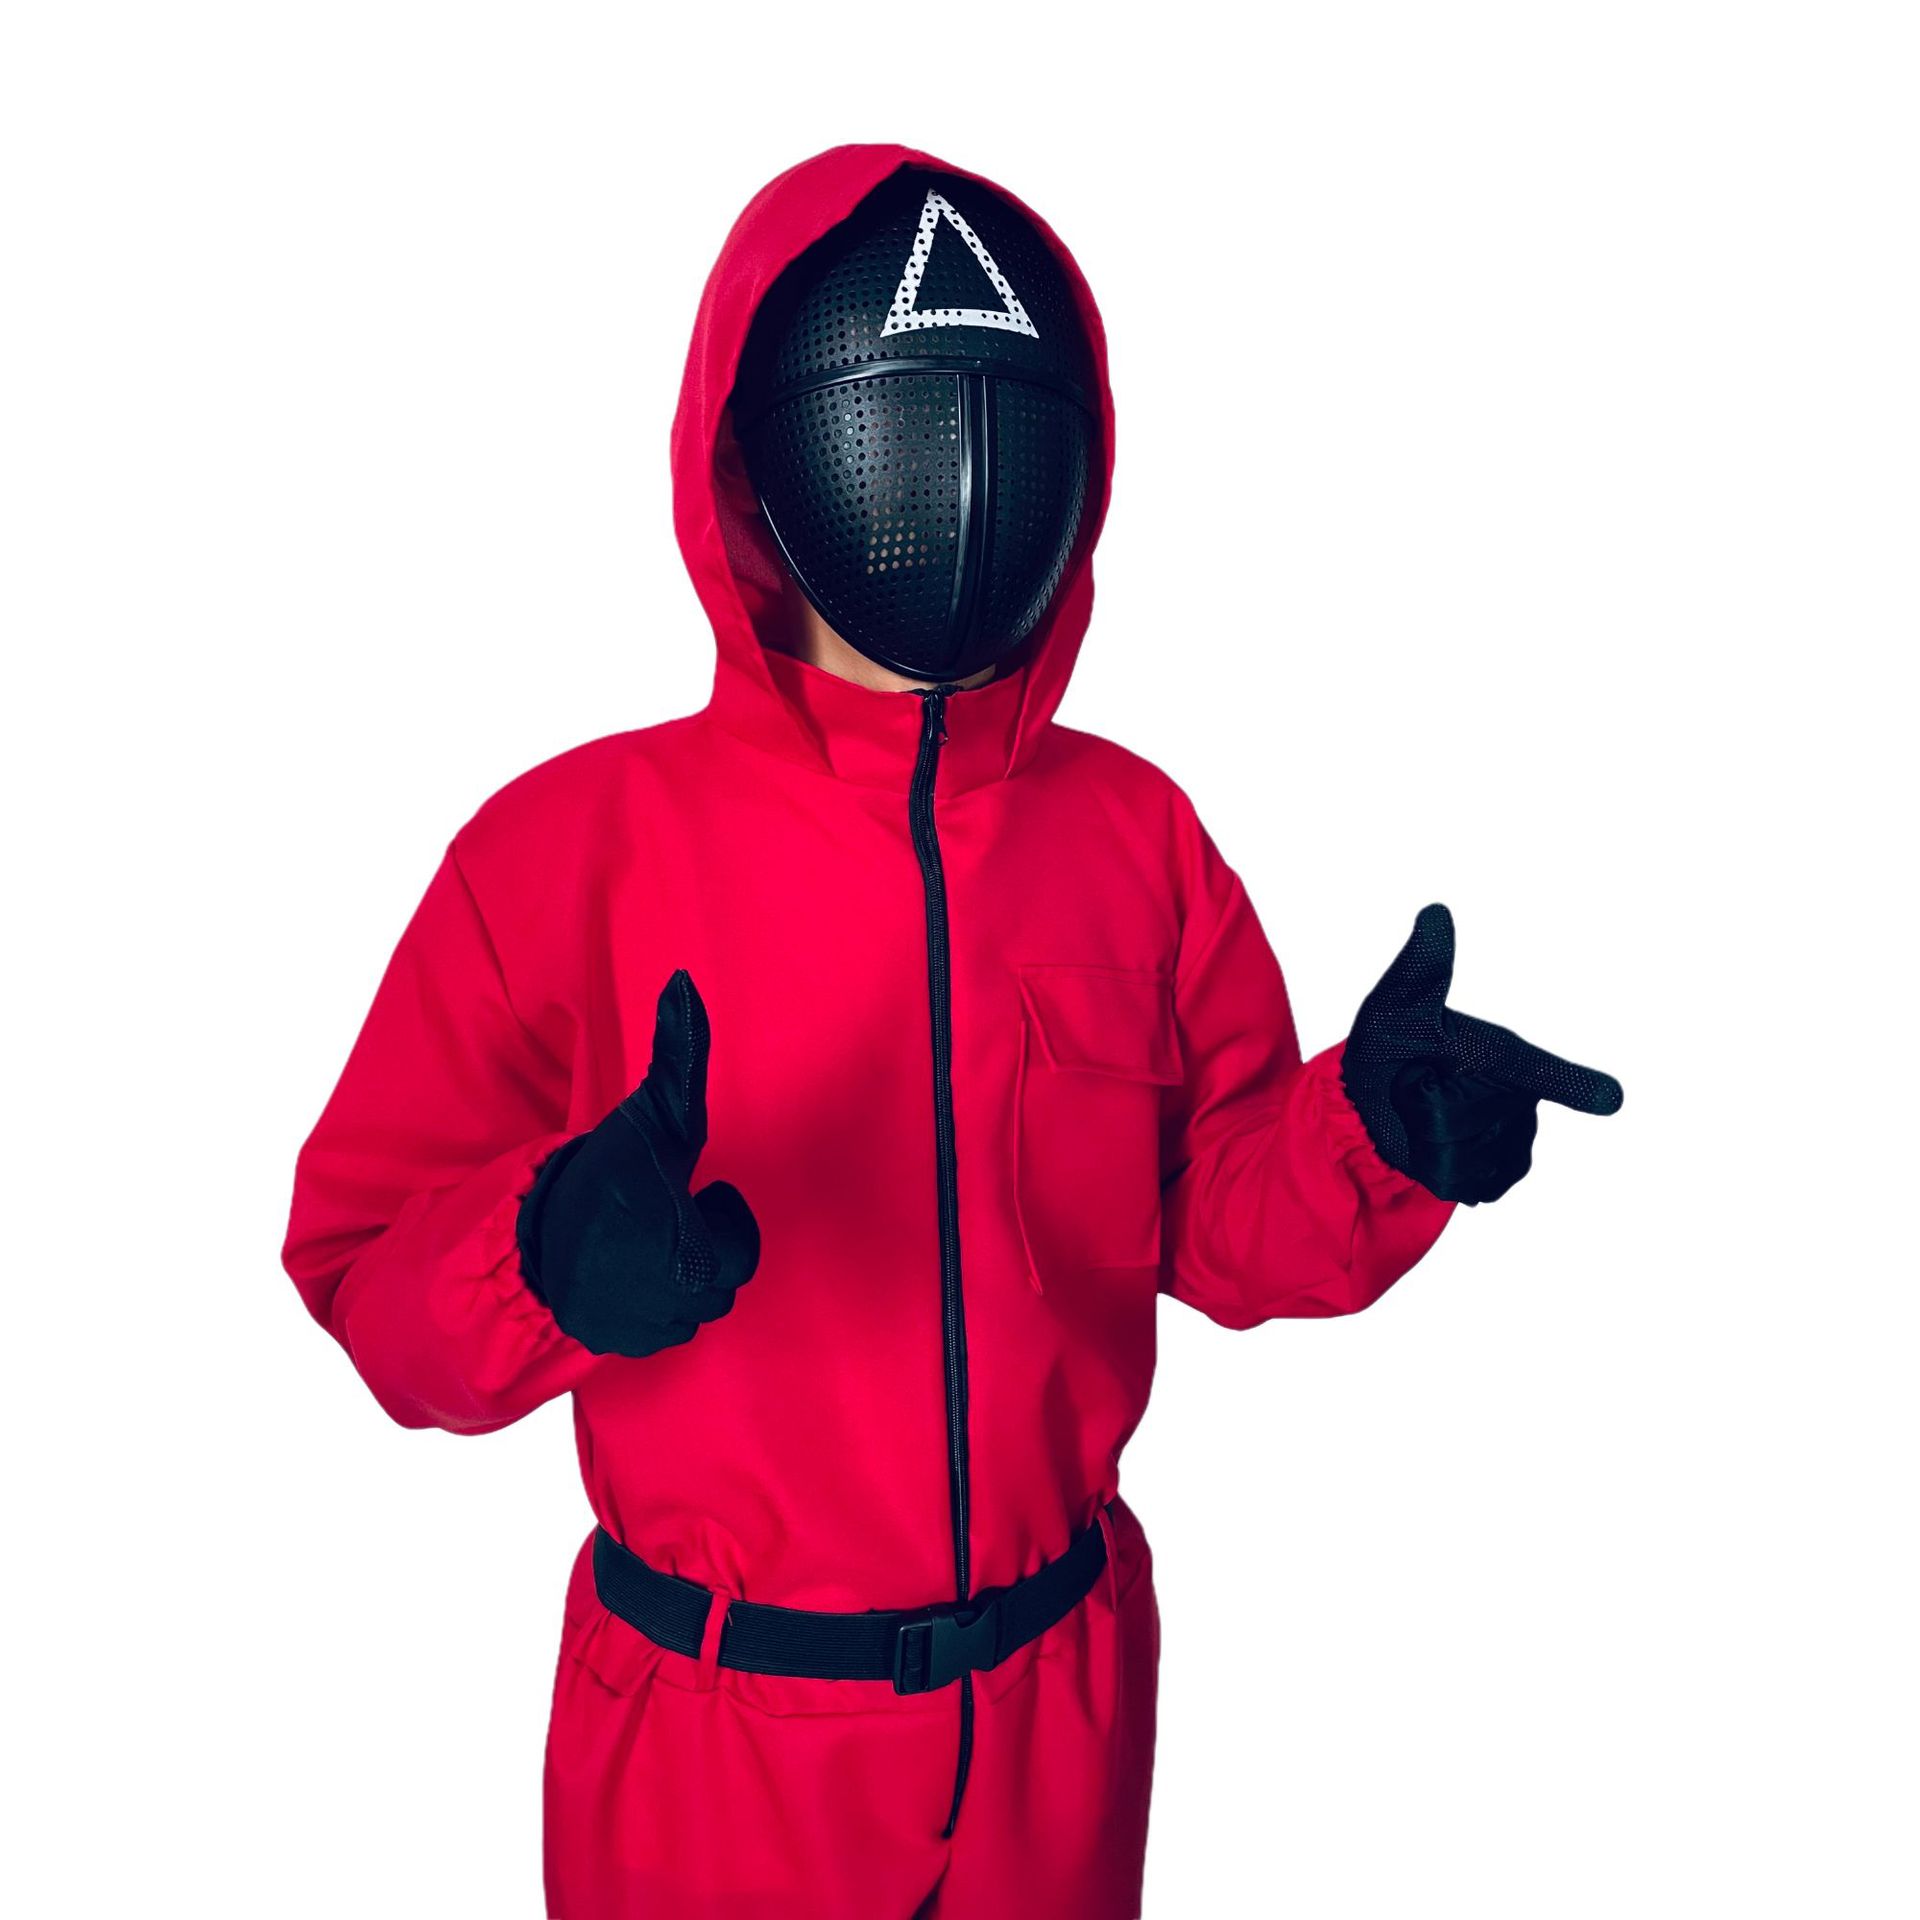 Squid game guard costume red uniform for adults and children